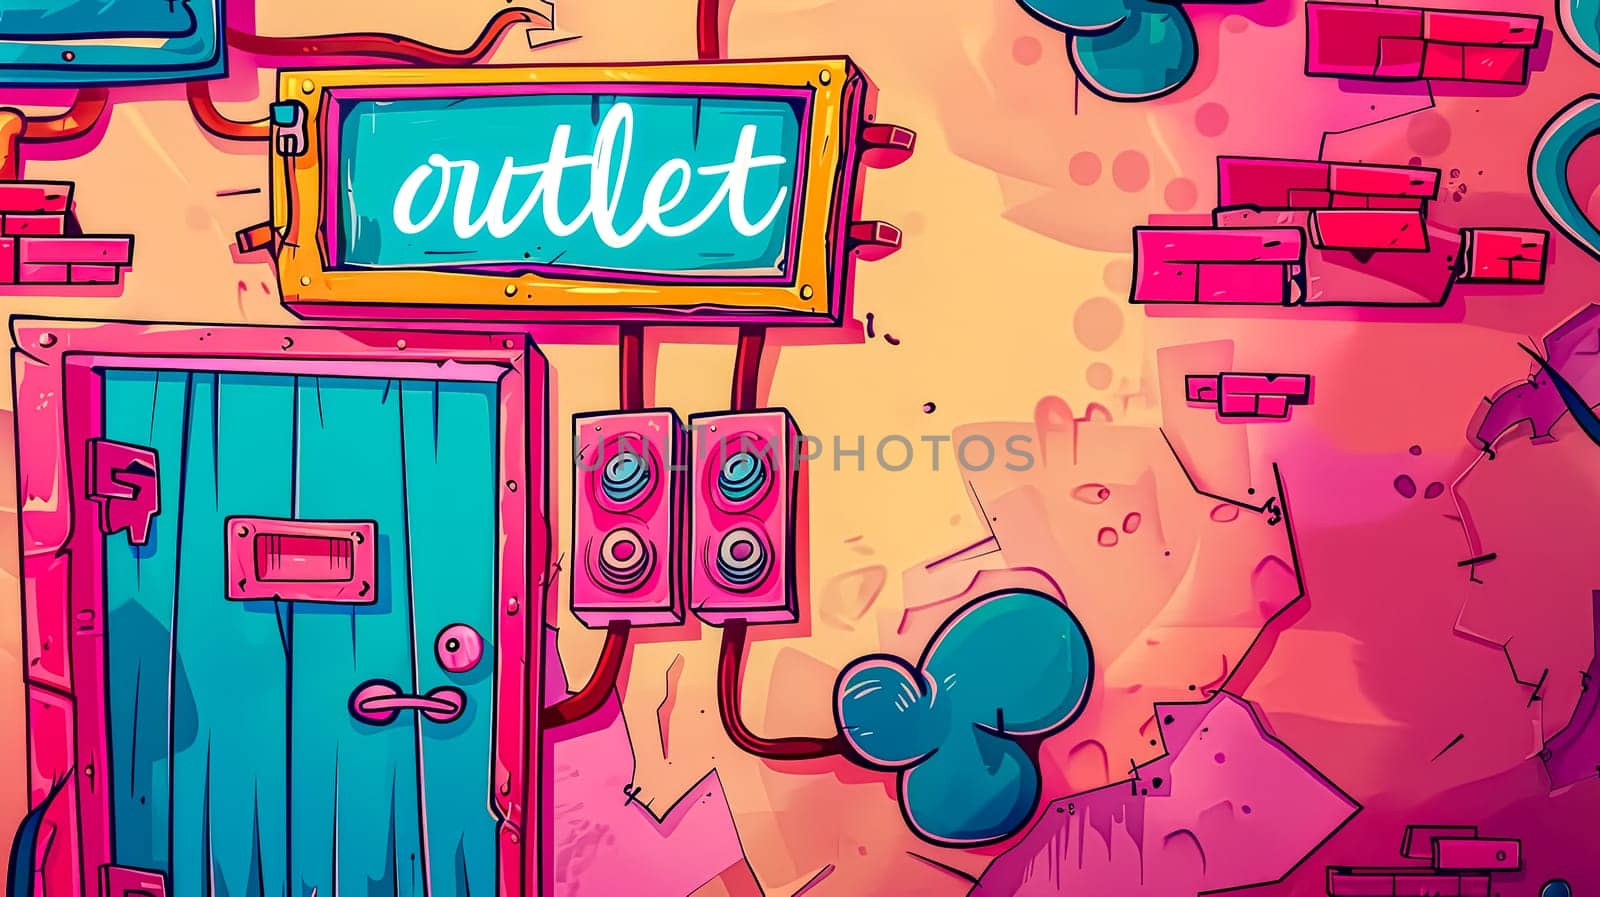 Colorful illustrated scene featuring an electric outlet sign, plugs, and a whimsical mouse hole